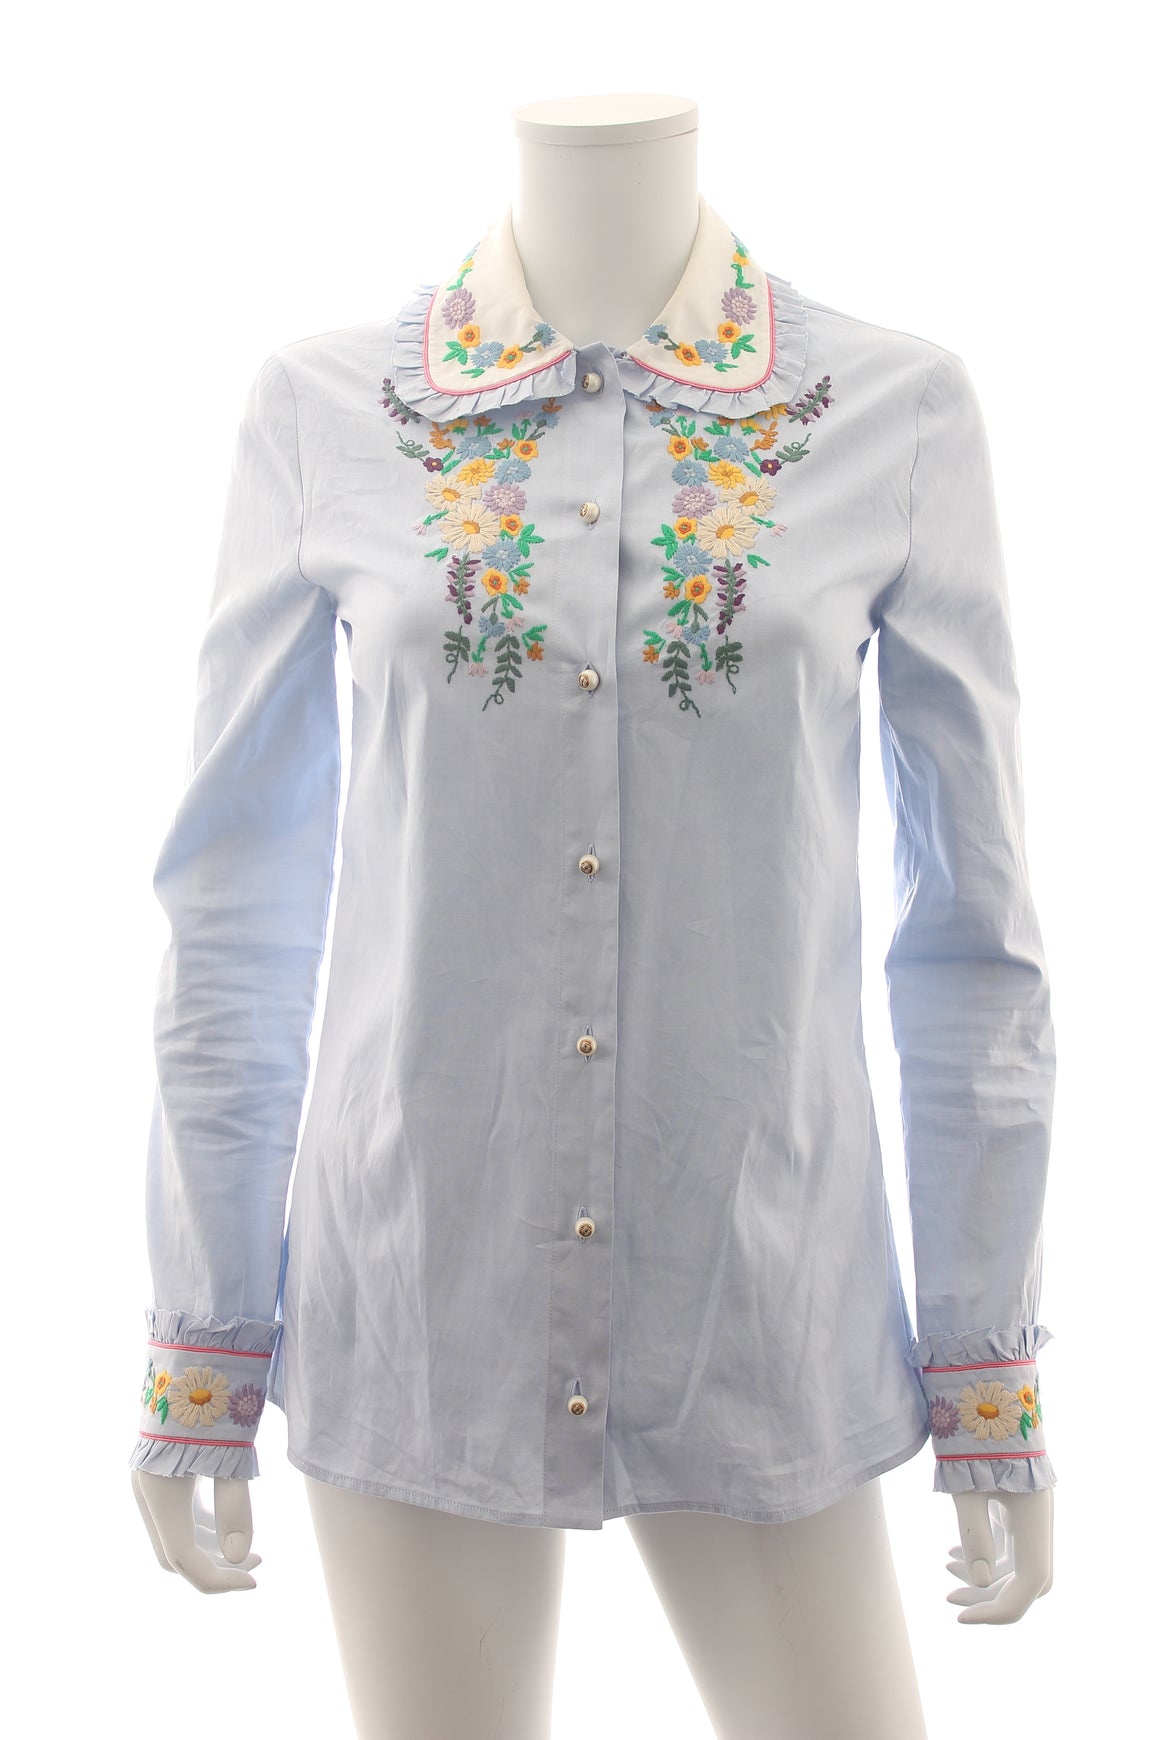 Gucci Floral-Embroidered Cotton Blouse